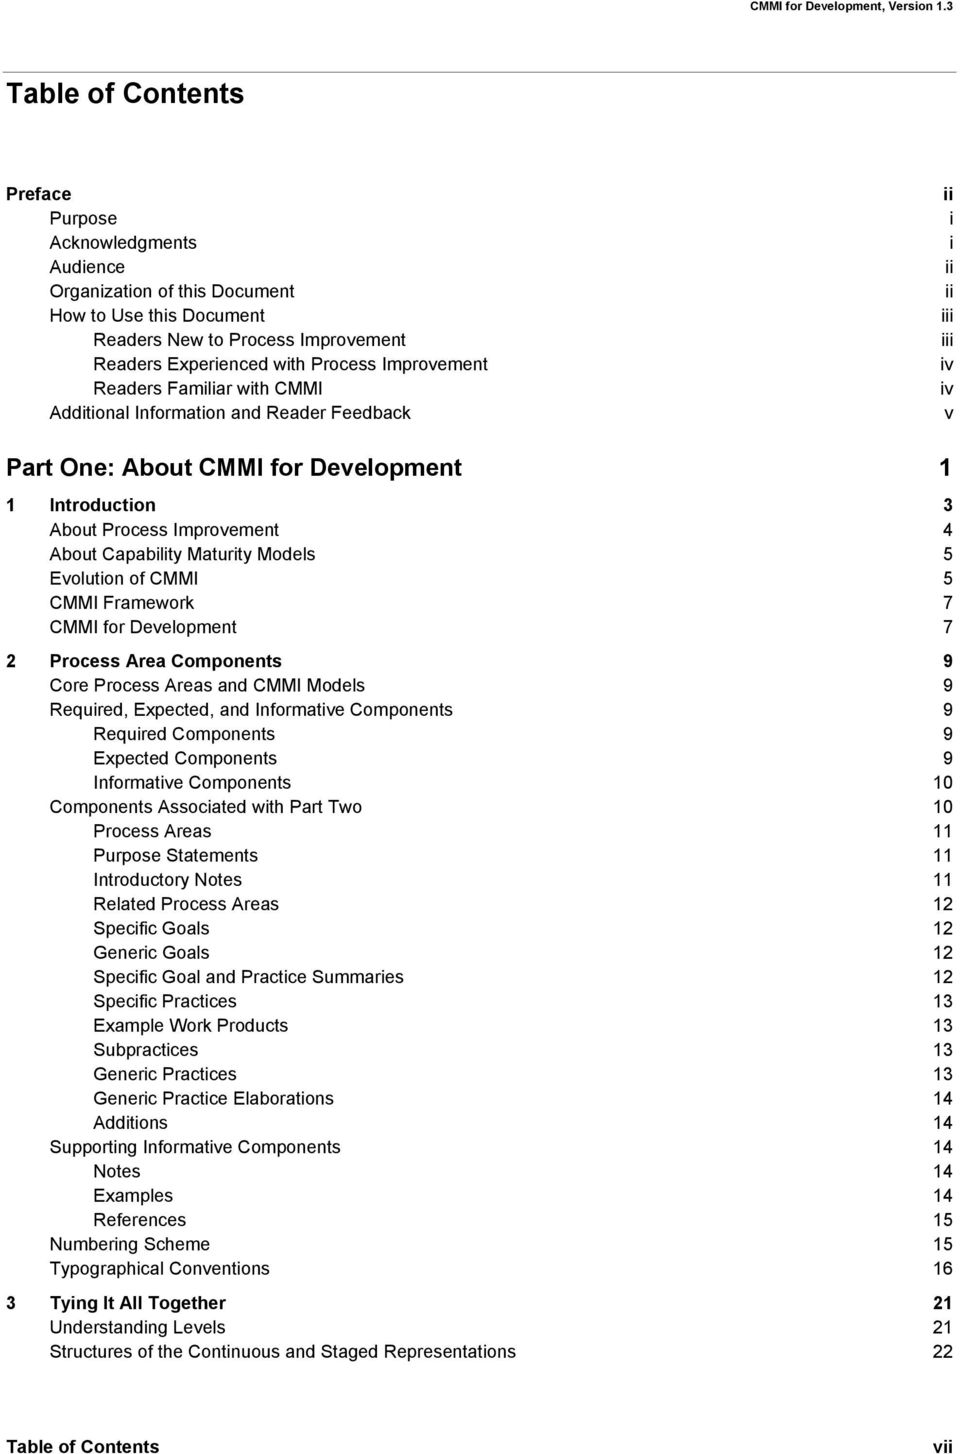 Maturity Models 5 Evolution of CMMI 5 CMMI Framework 7 CMMI for Development 7 2 Process Area Components 9 Core Process Areas and CMMI Models 9 Required, Expected, and Informative Components 9